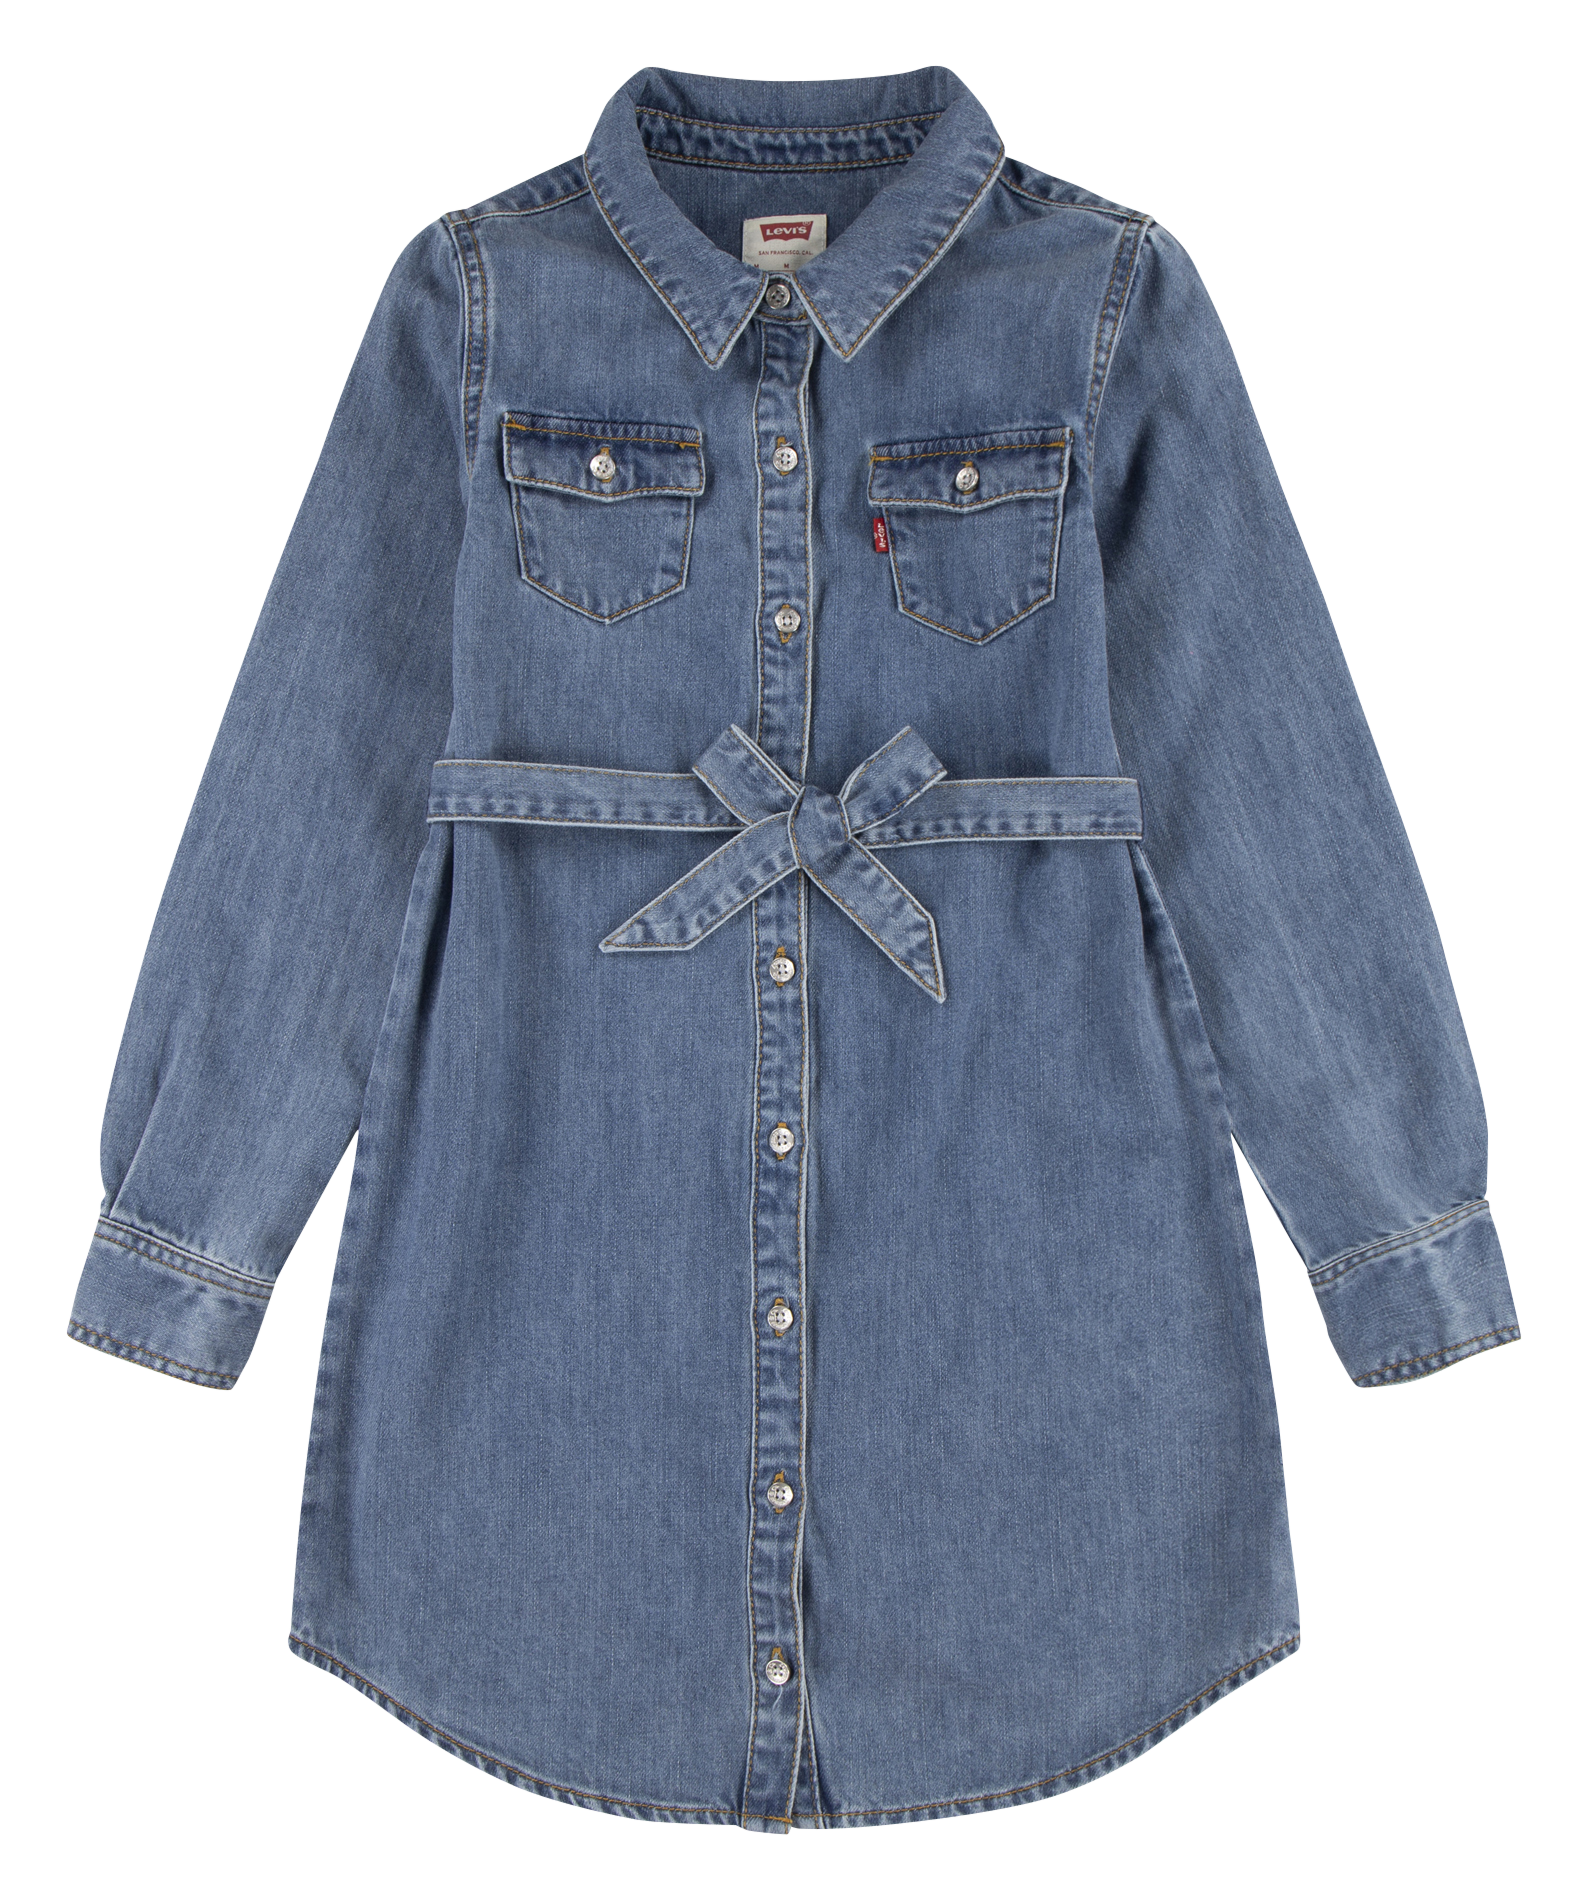 2022 New Fashion Brand Baby Kids Girl Denim Mini Dress Jean Long Sleeve  with bow Casual Party Shirt Dress